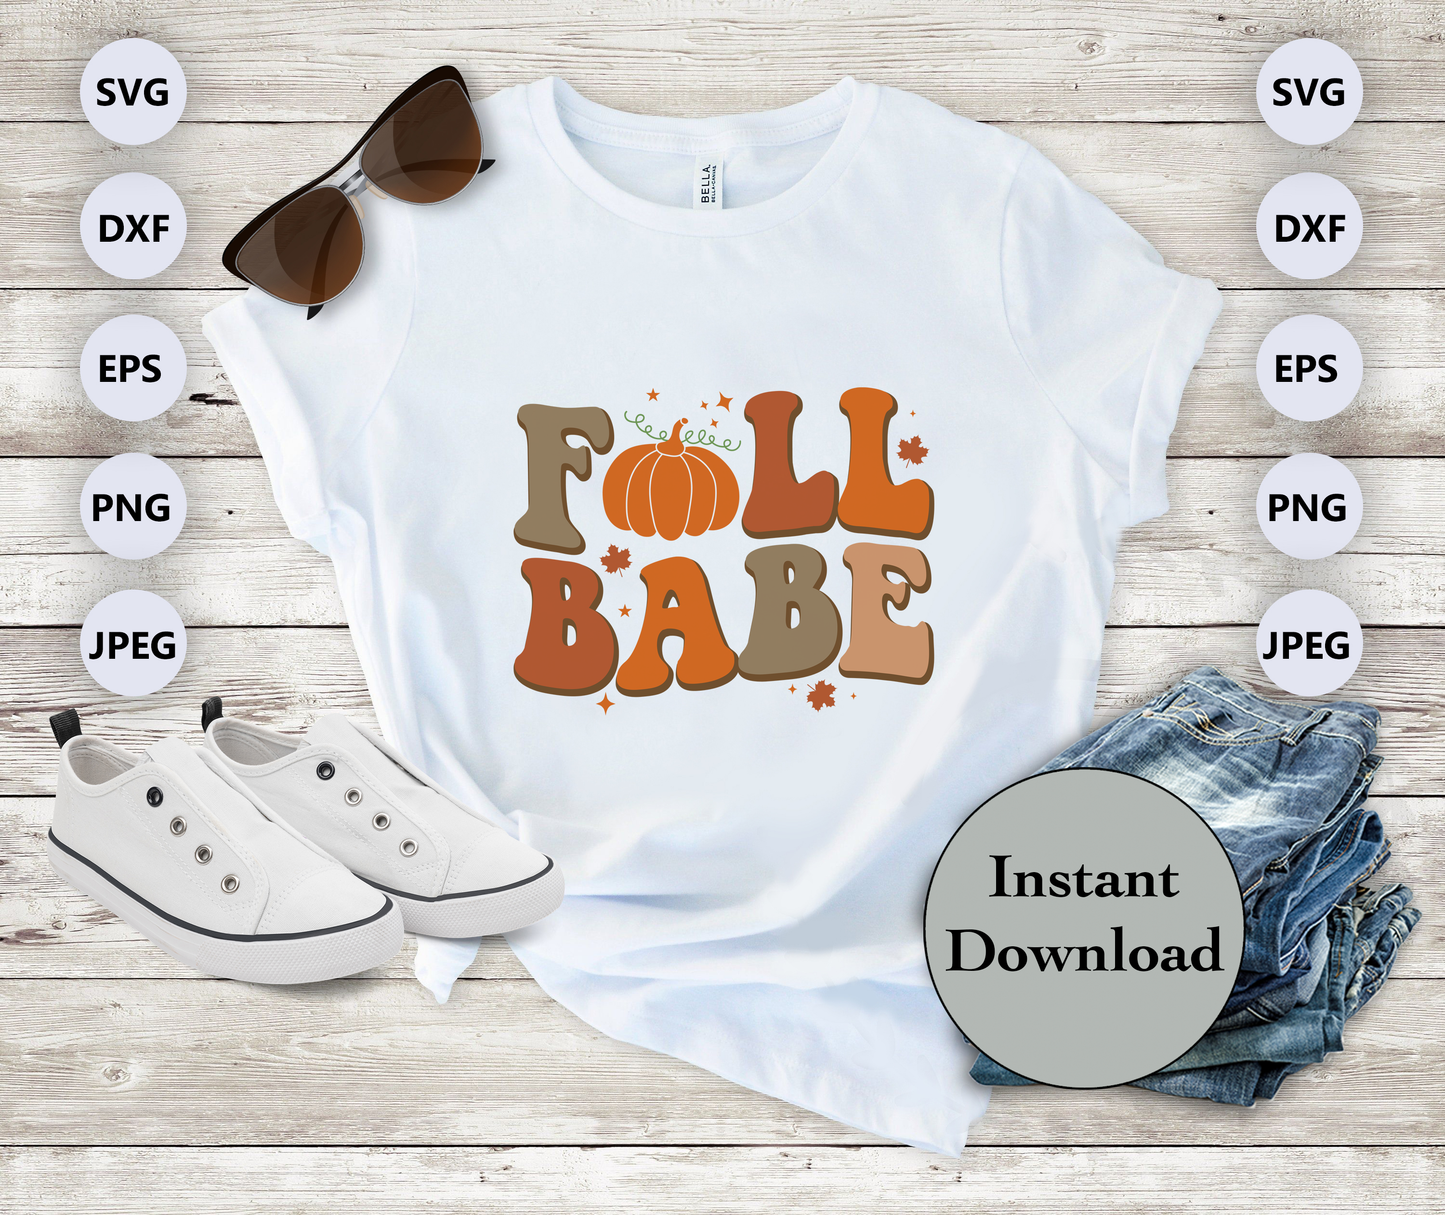 Fall Babe SVG, PNG, JPG, EPS, DXF File, Instant Download • Digital Cutting Files